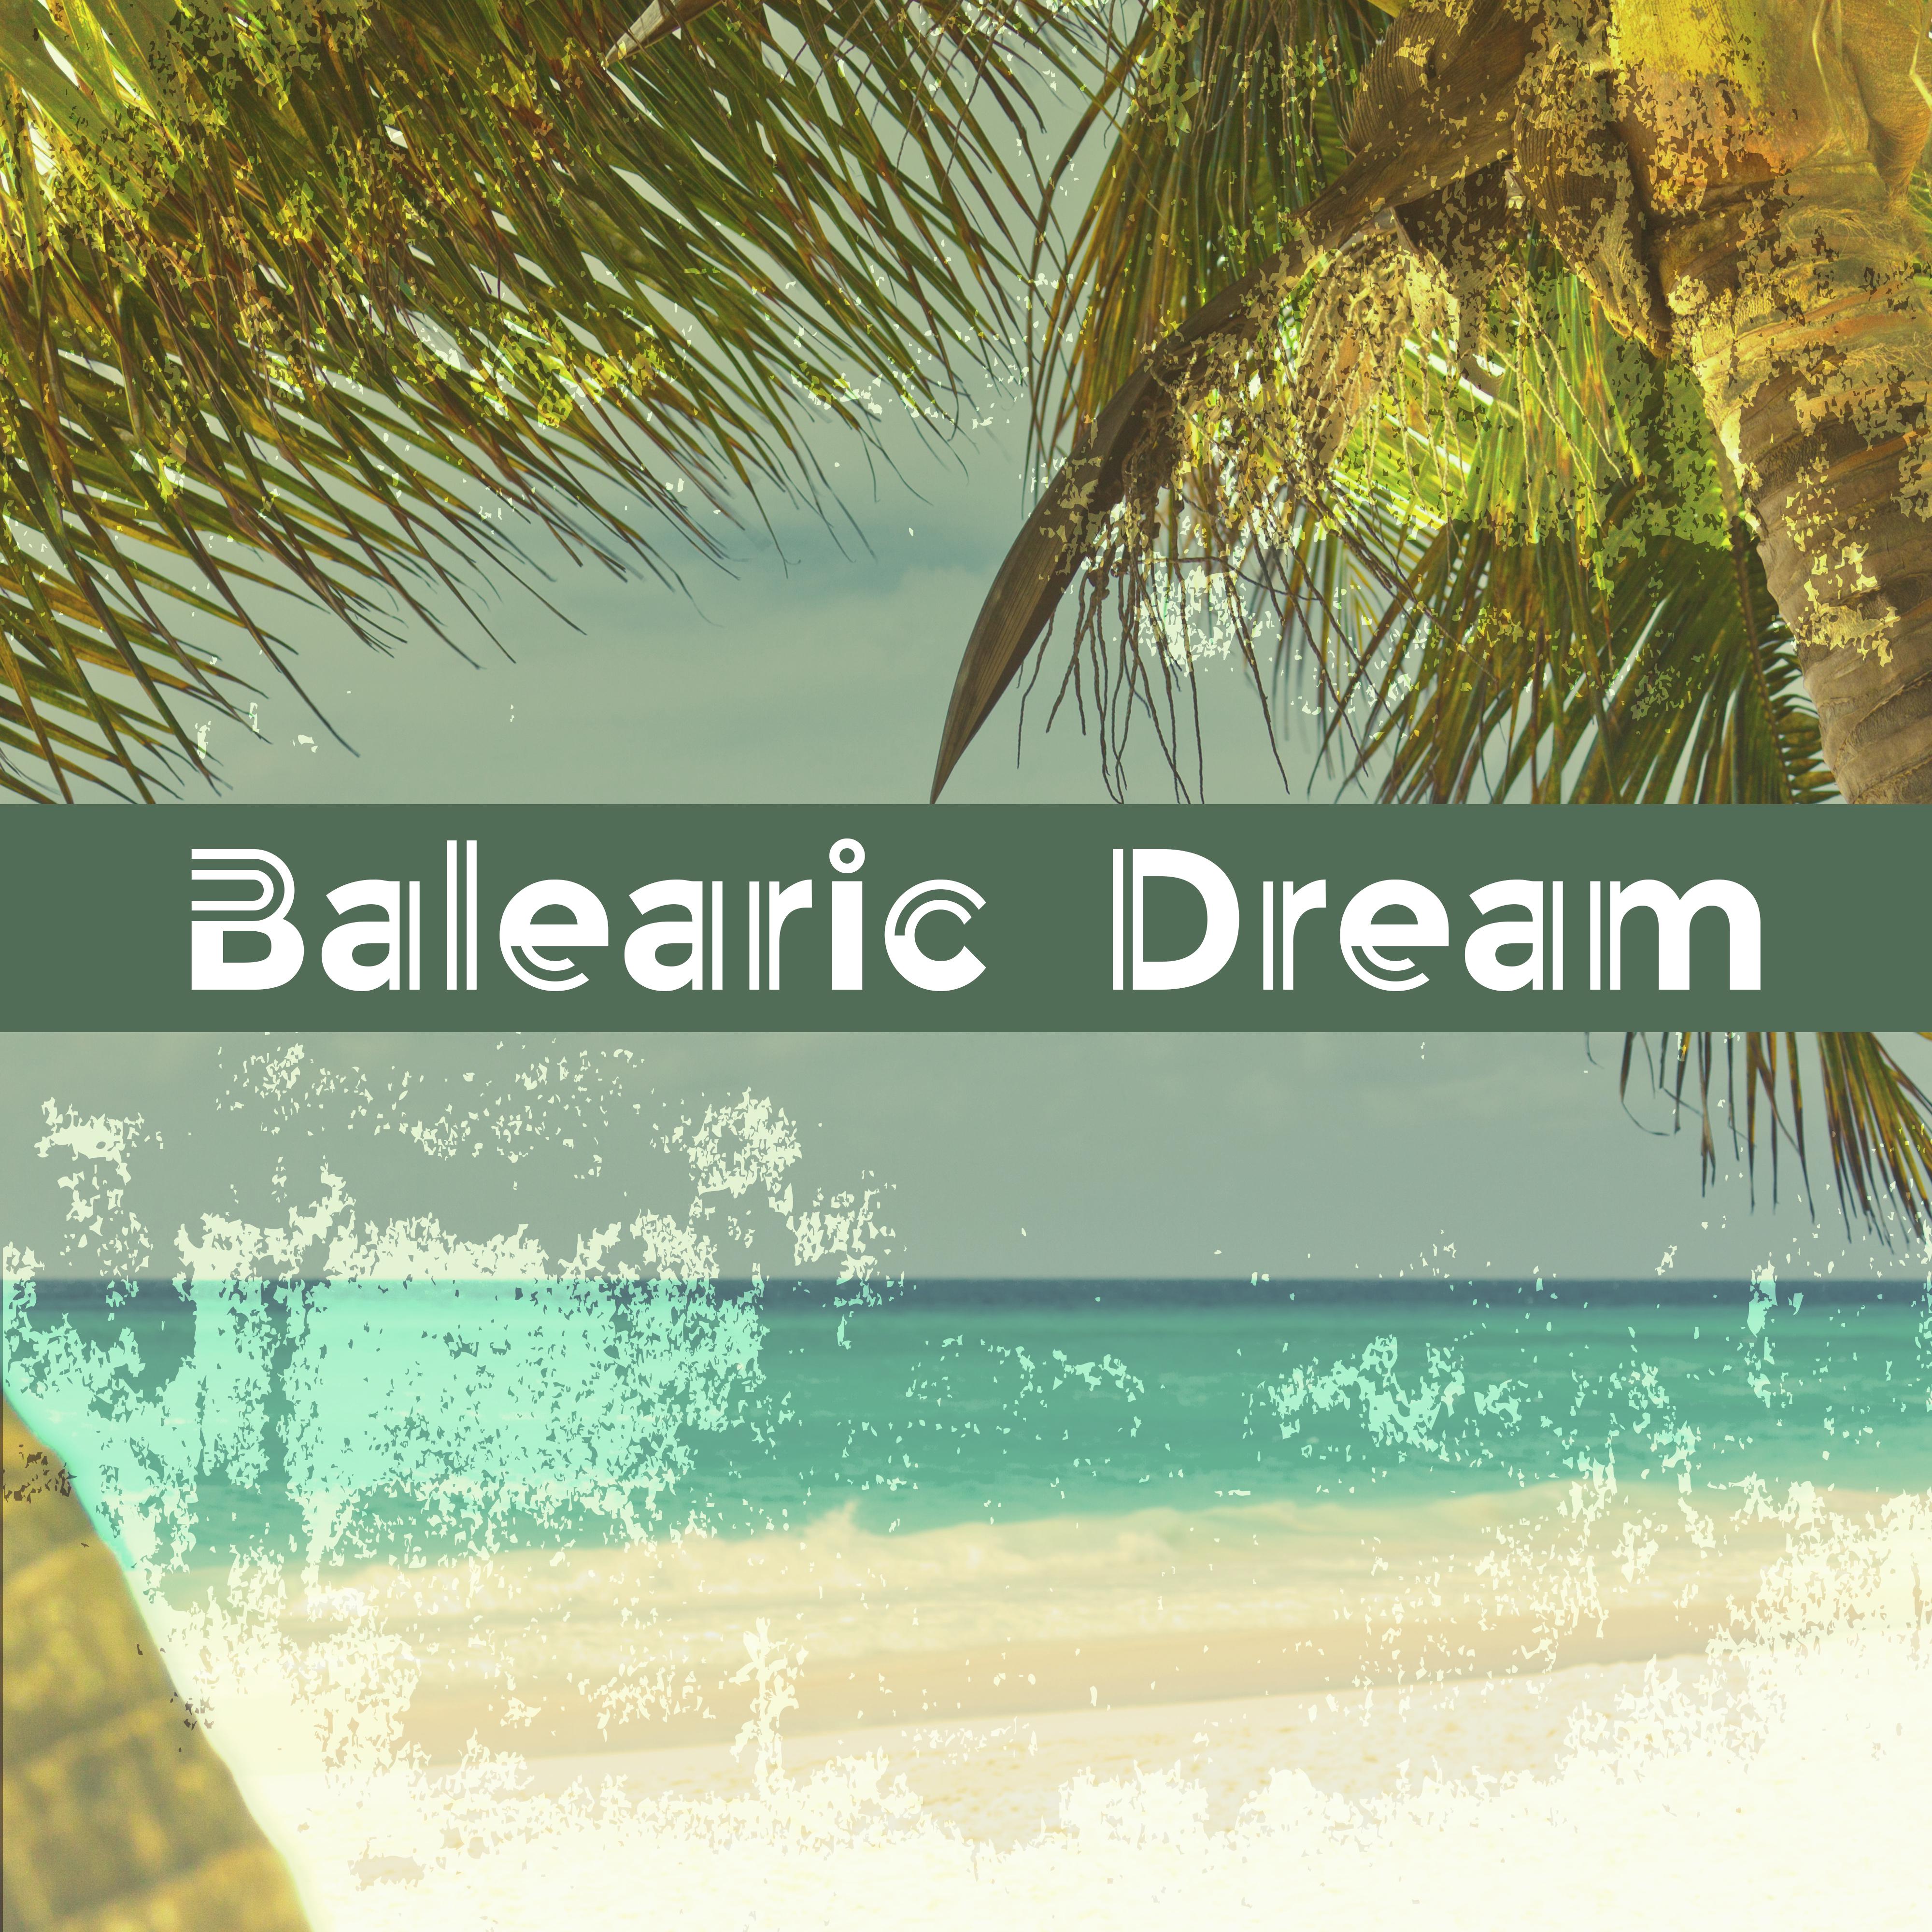 Balearic Dream  Chill Out Music, Deep Beats, Godd Vibes Only, Music for Summer Relax